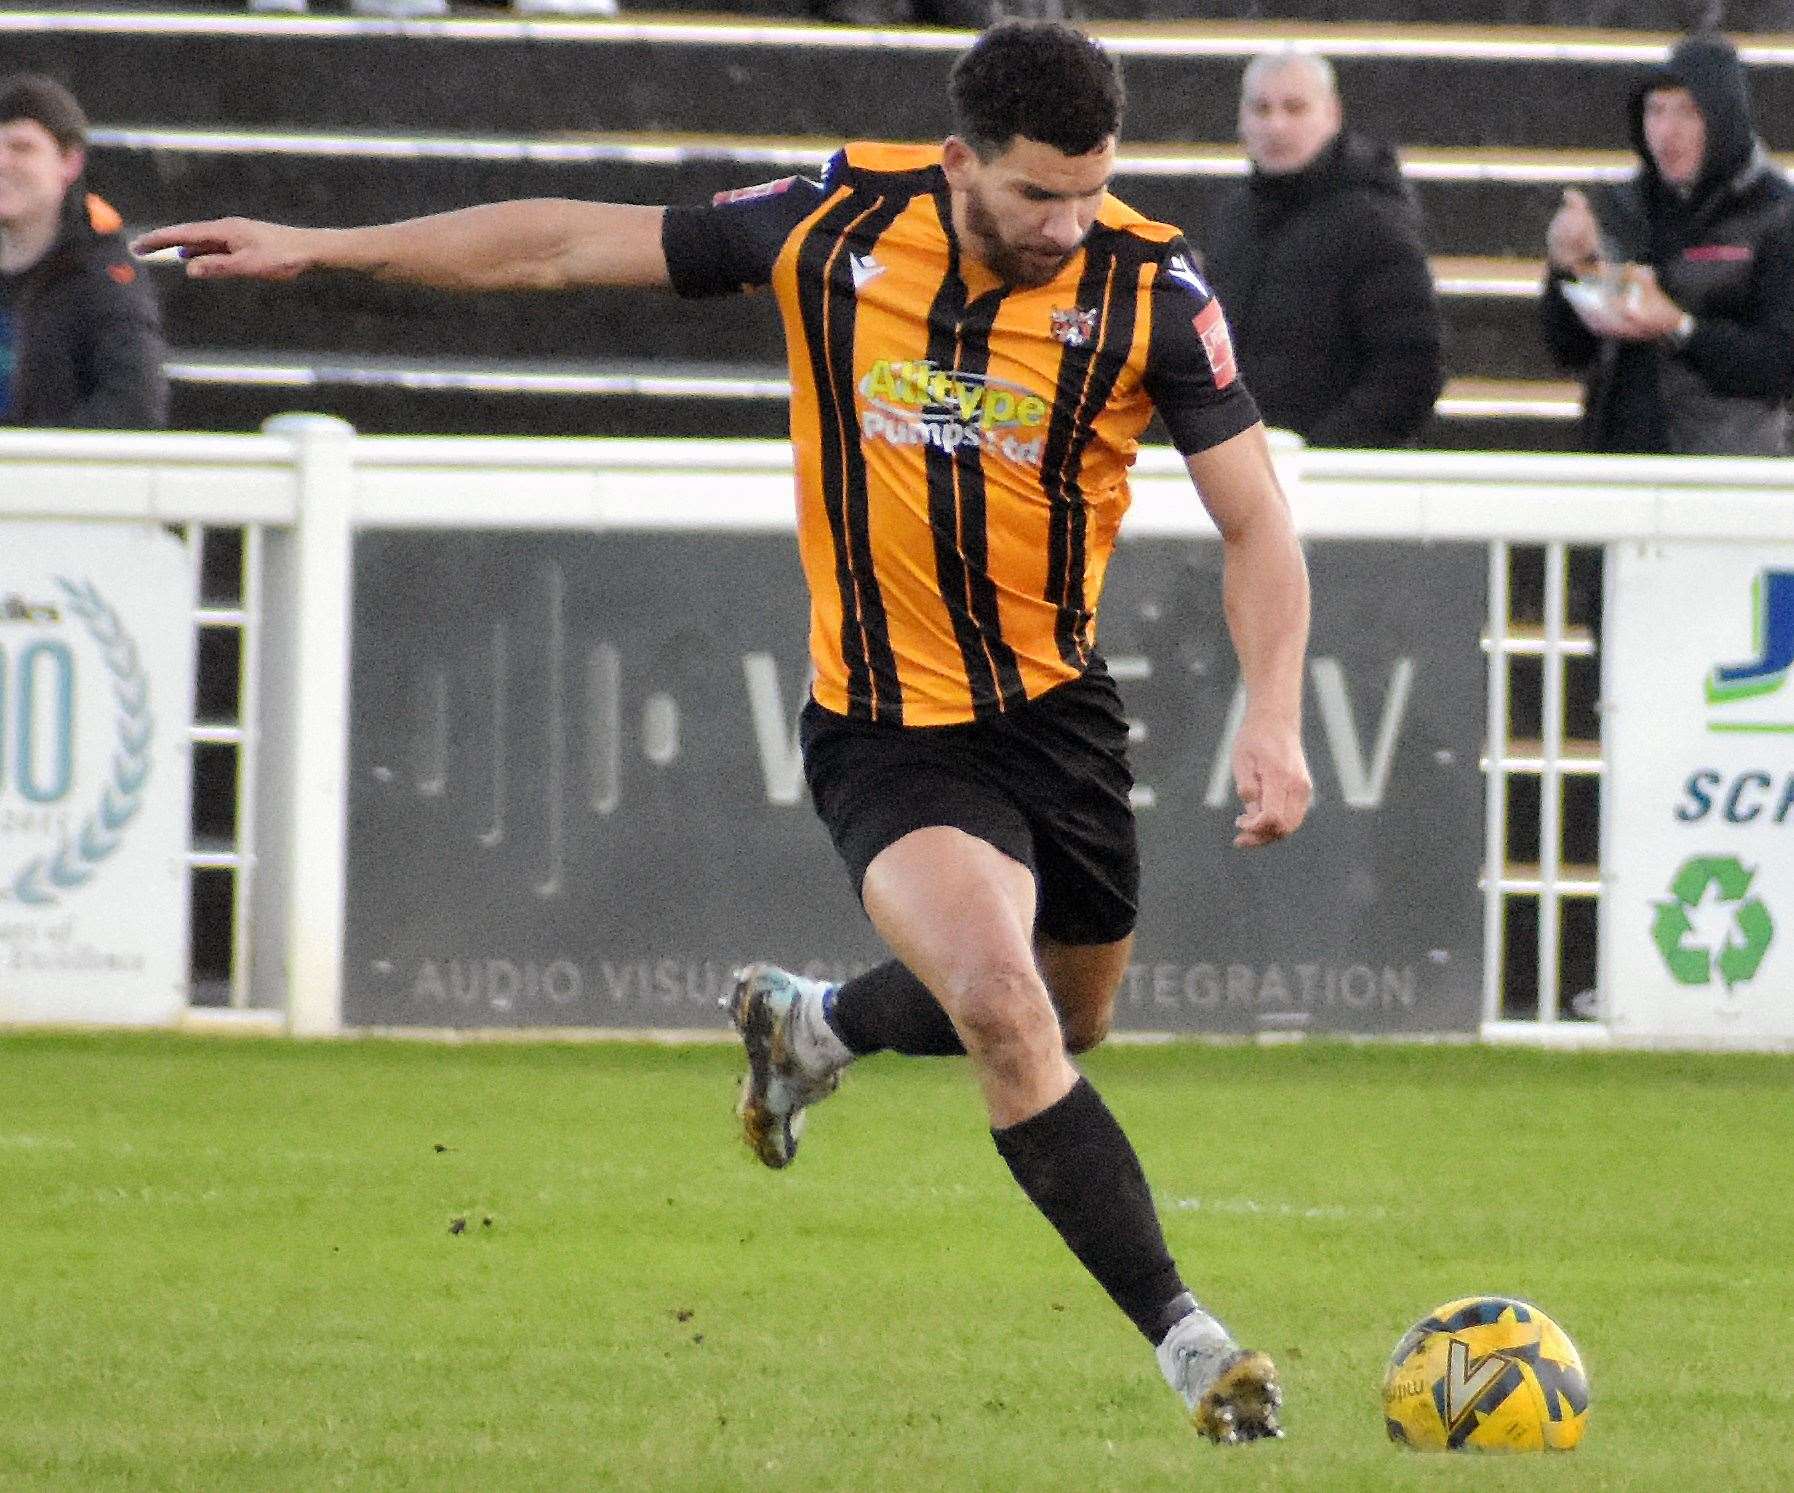 One of Folkestone's scorers Nathan Green sends the ball forward. Picture: Randolph File